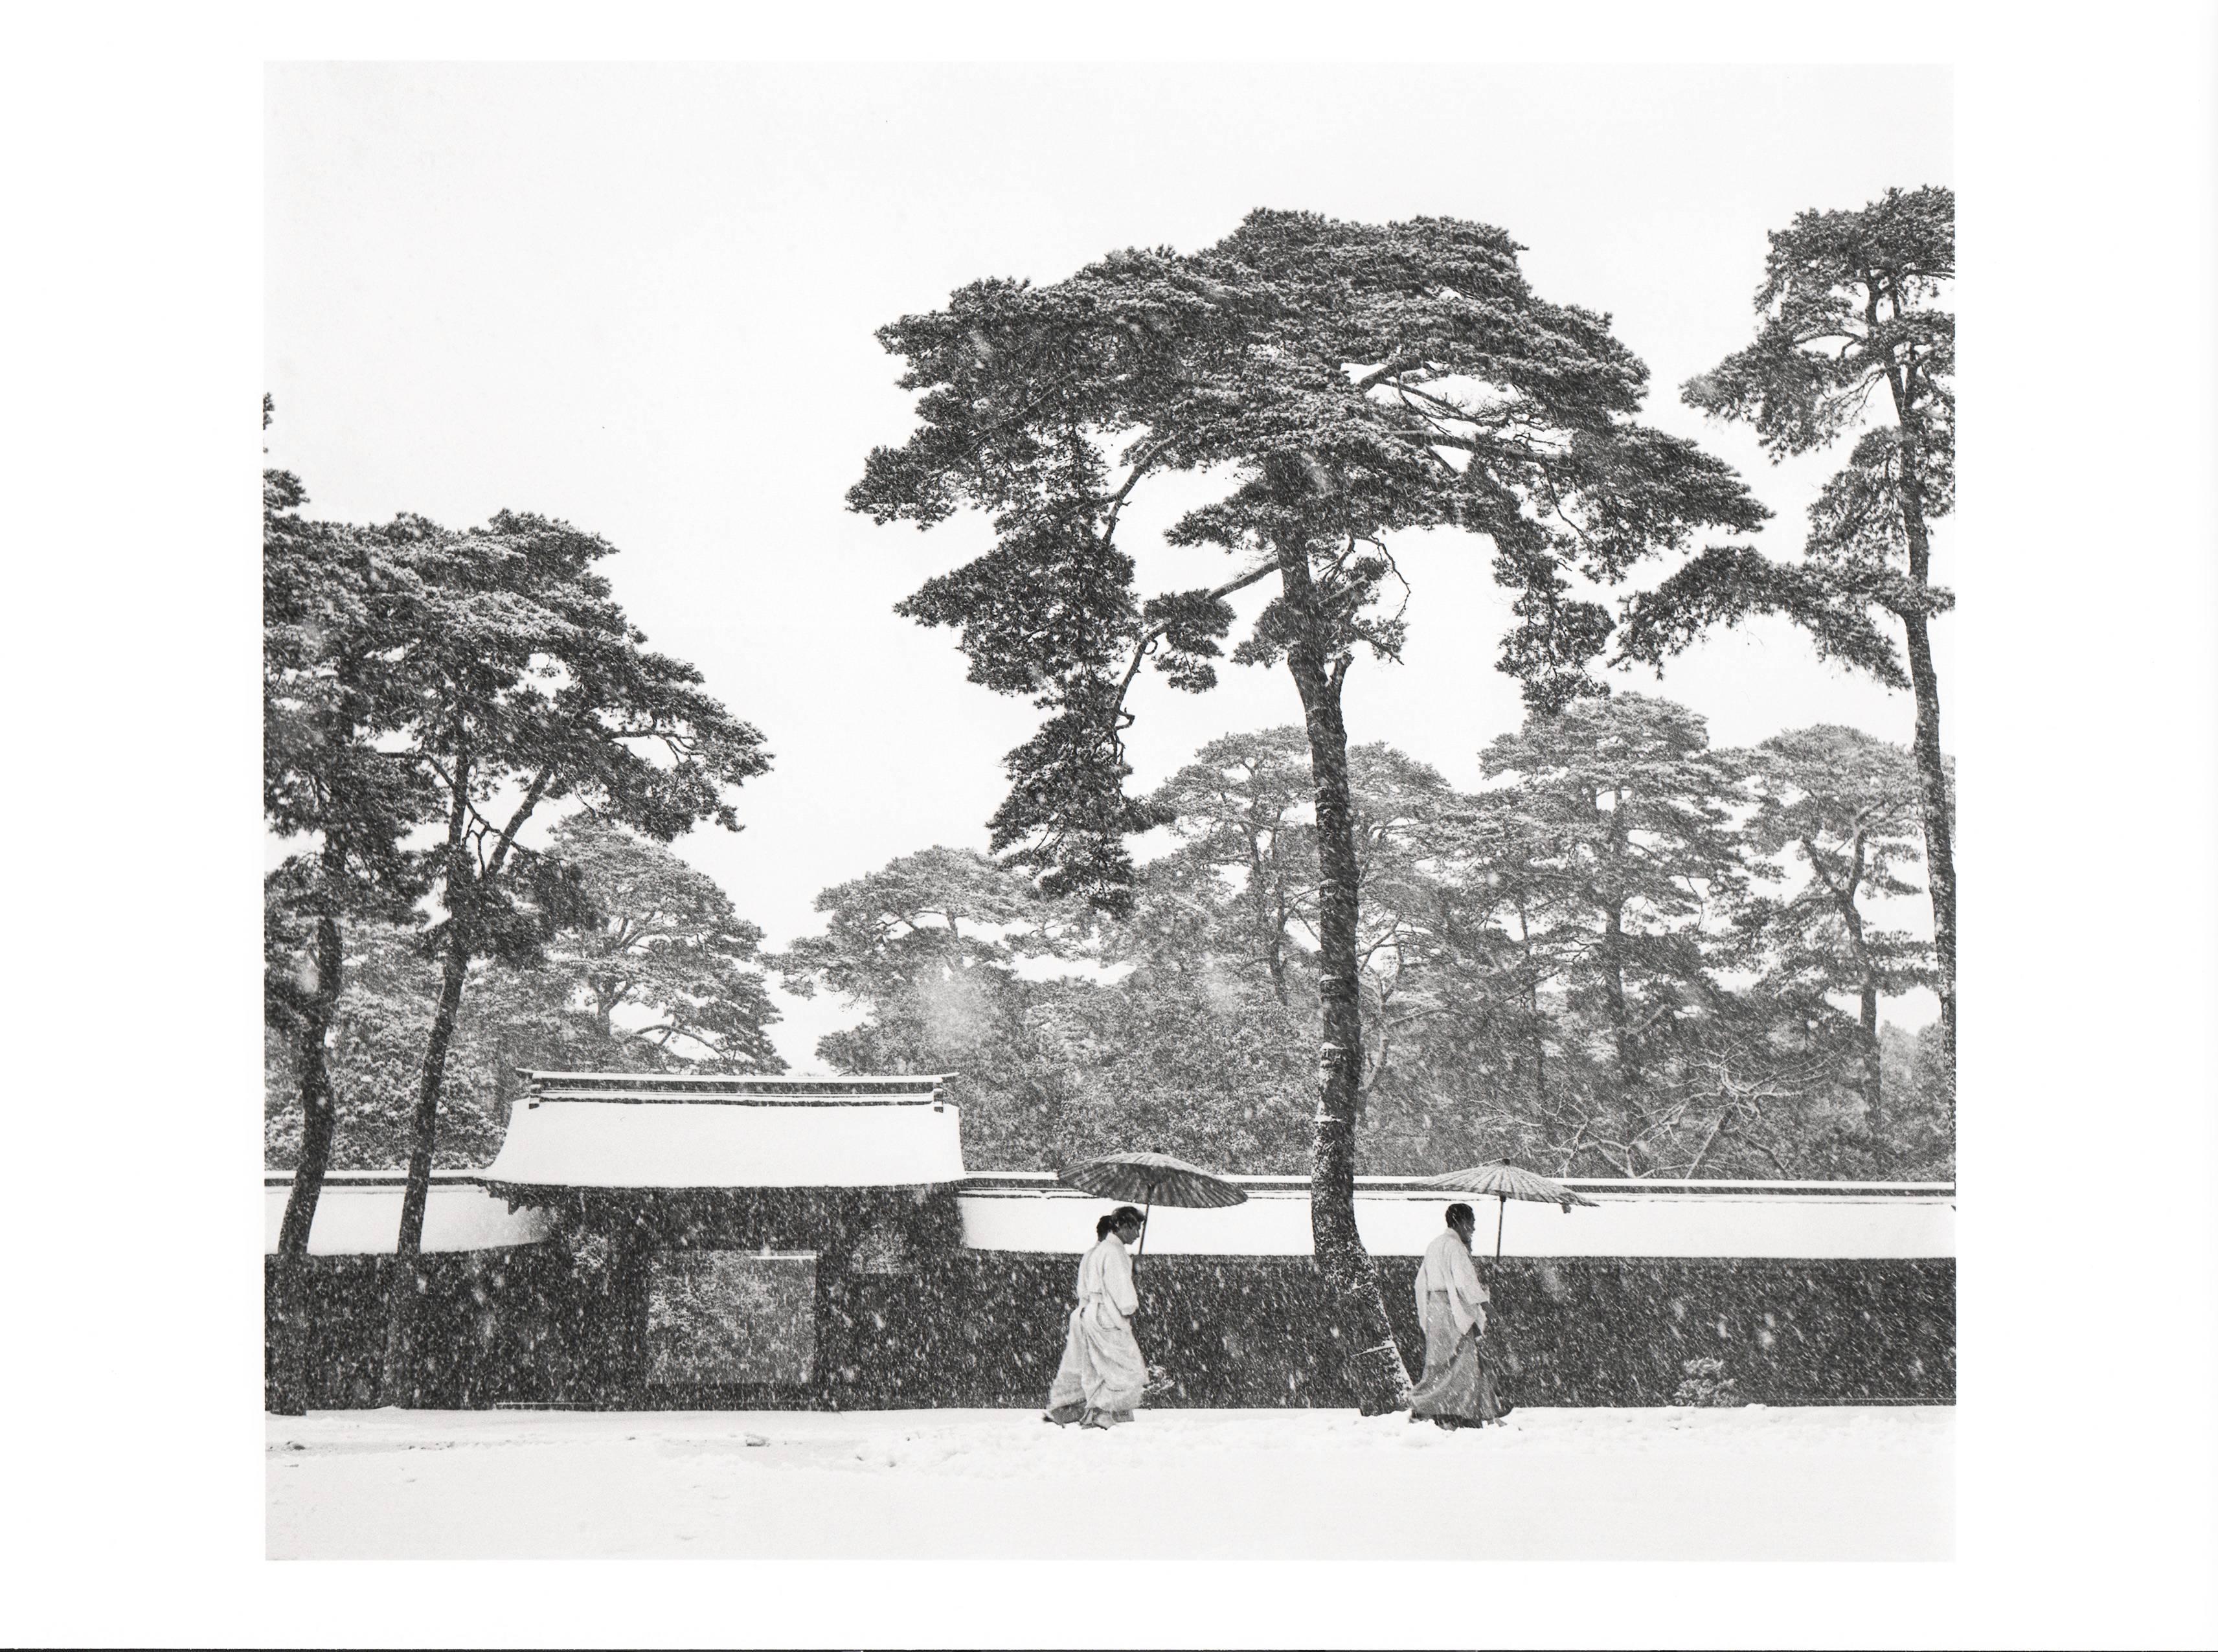 In the Court of the Meiji Temple, Tokyo, Japan, 1952 - Photograph by Werner Bischof